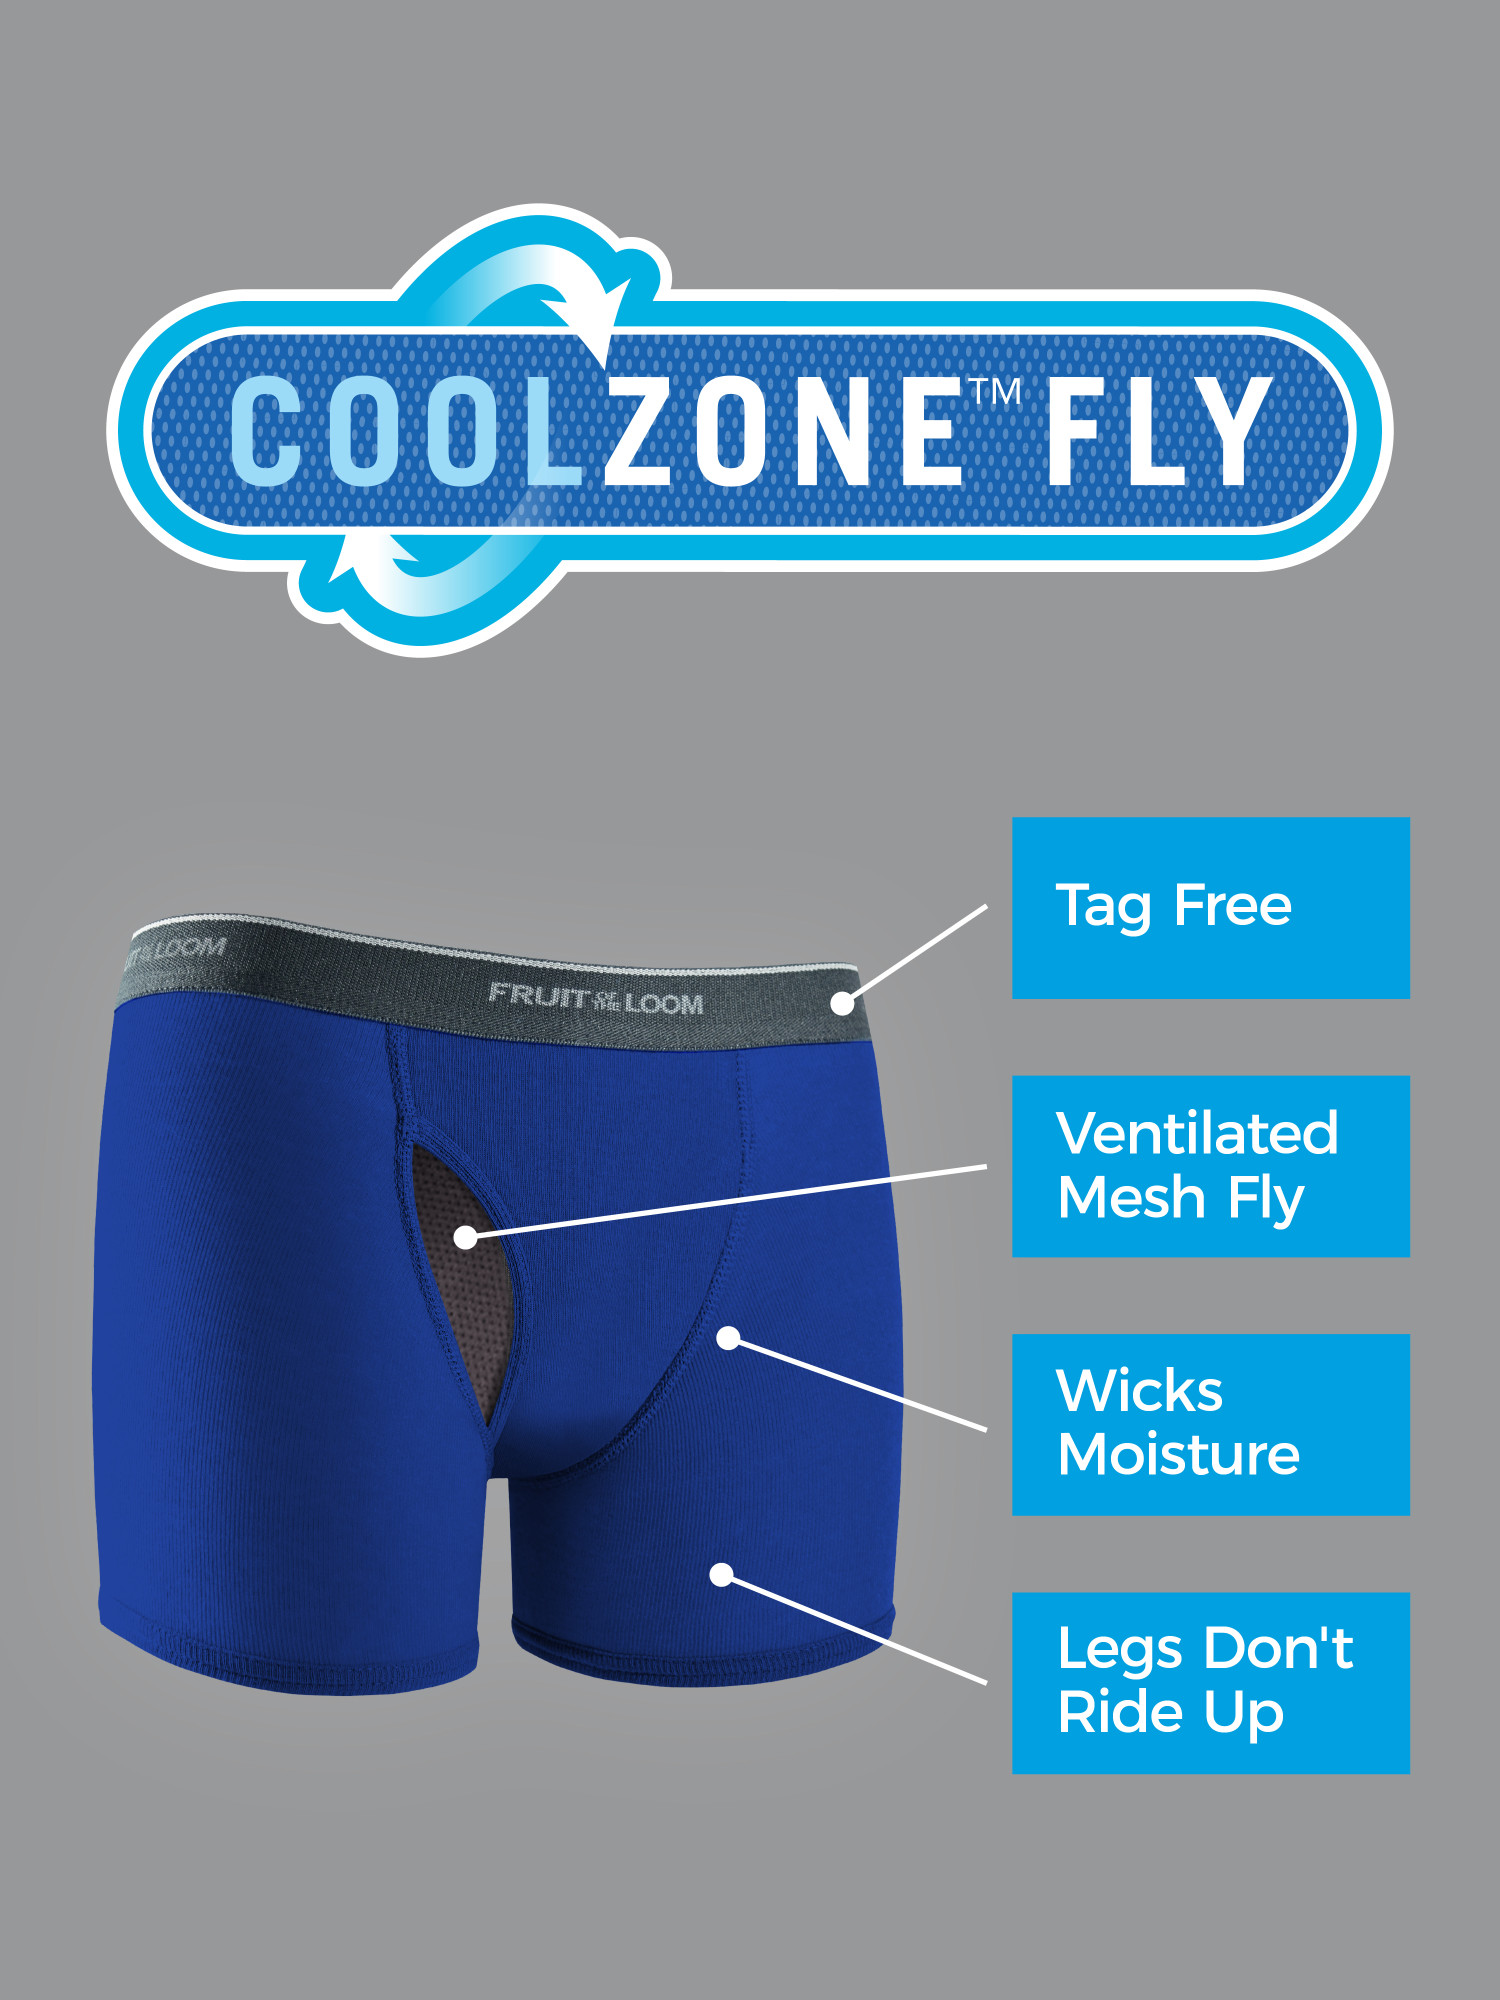 Fruit of the Loom Boys' CoolZone Boxer Briefs, 5 Pack - image 3 of 8